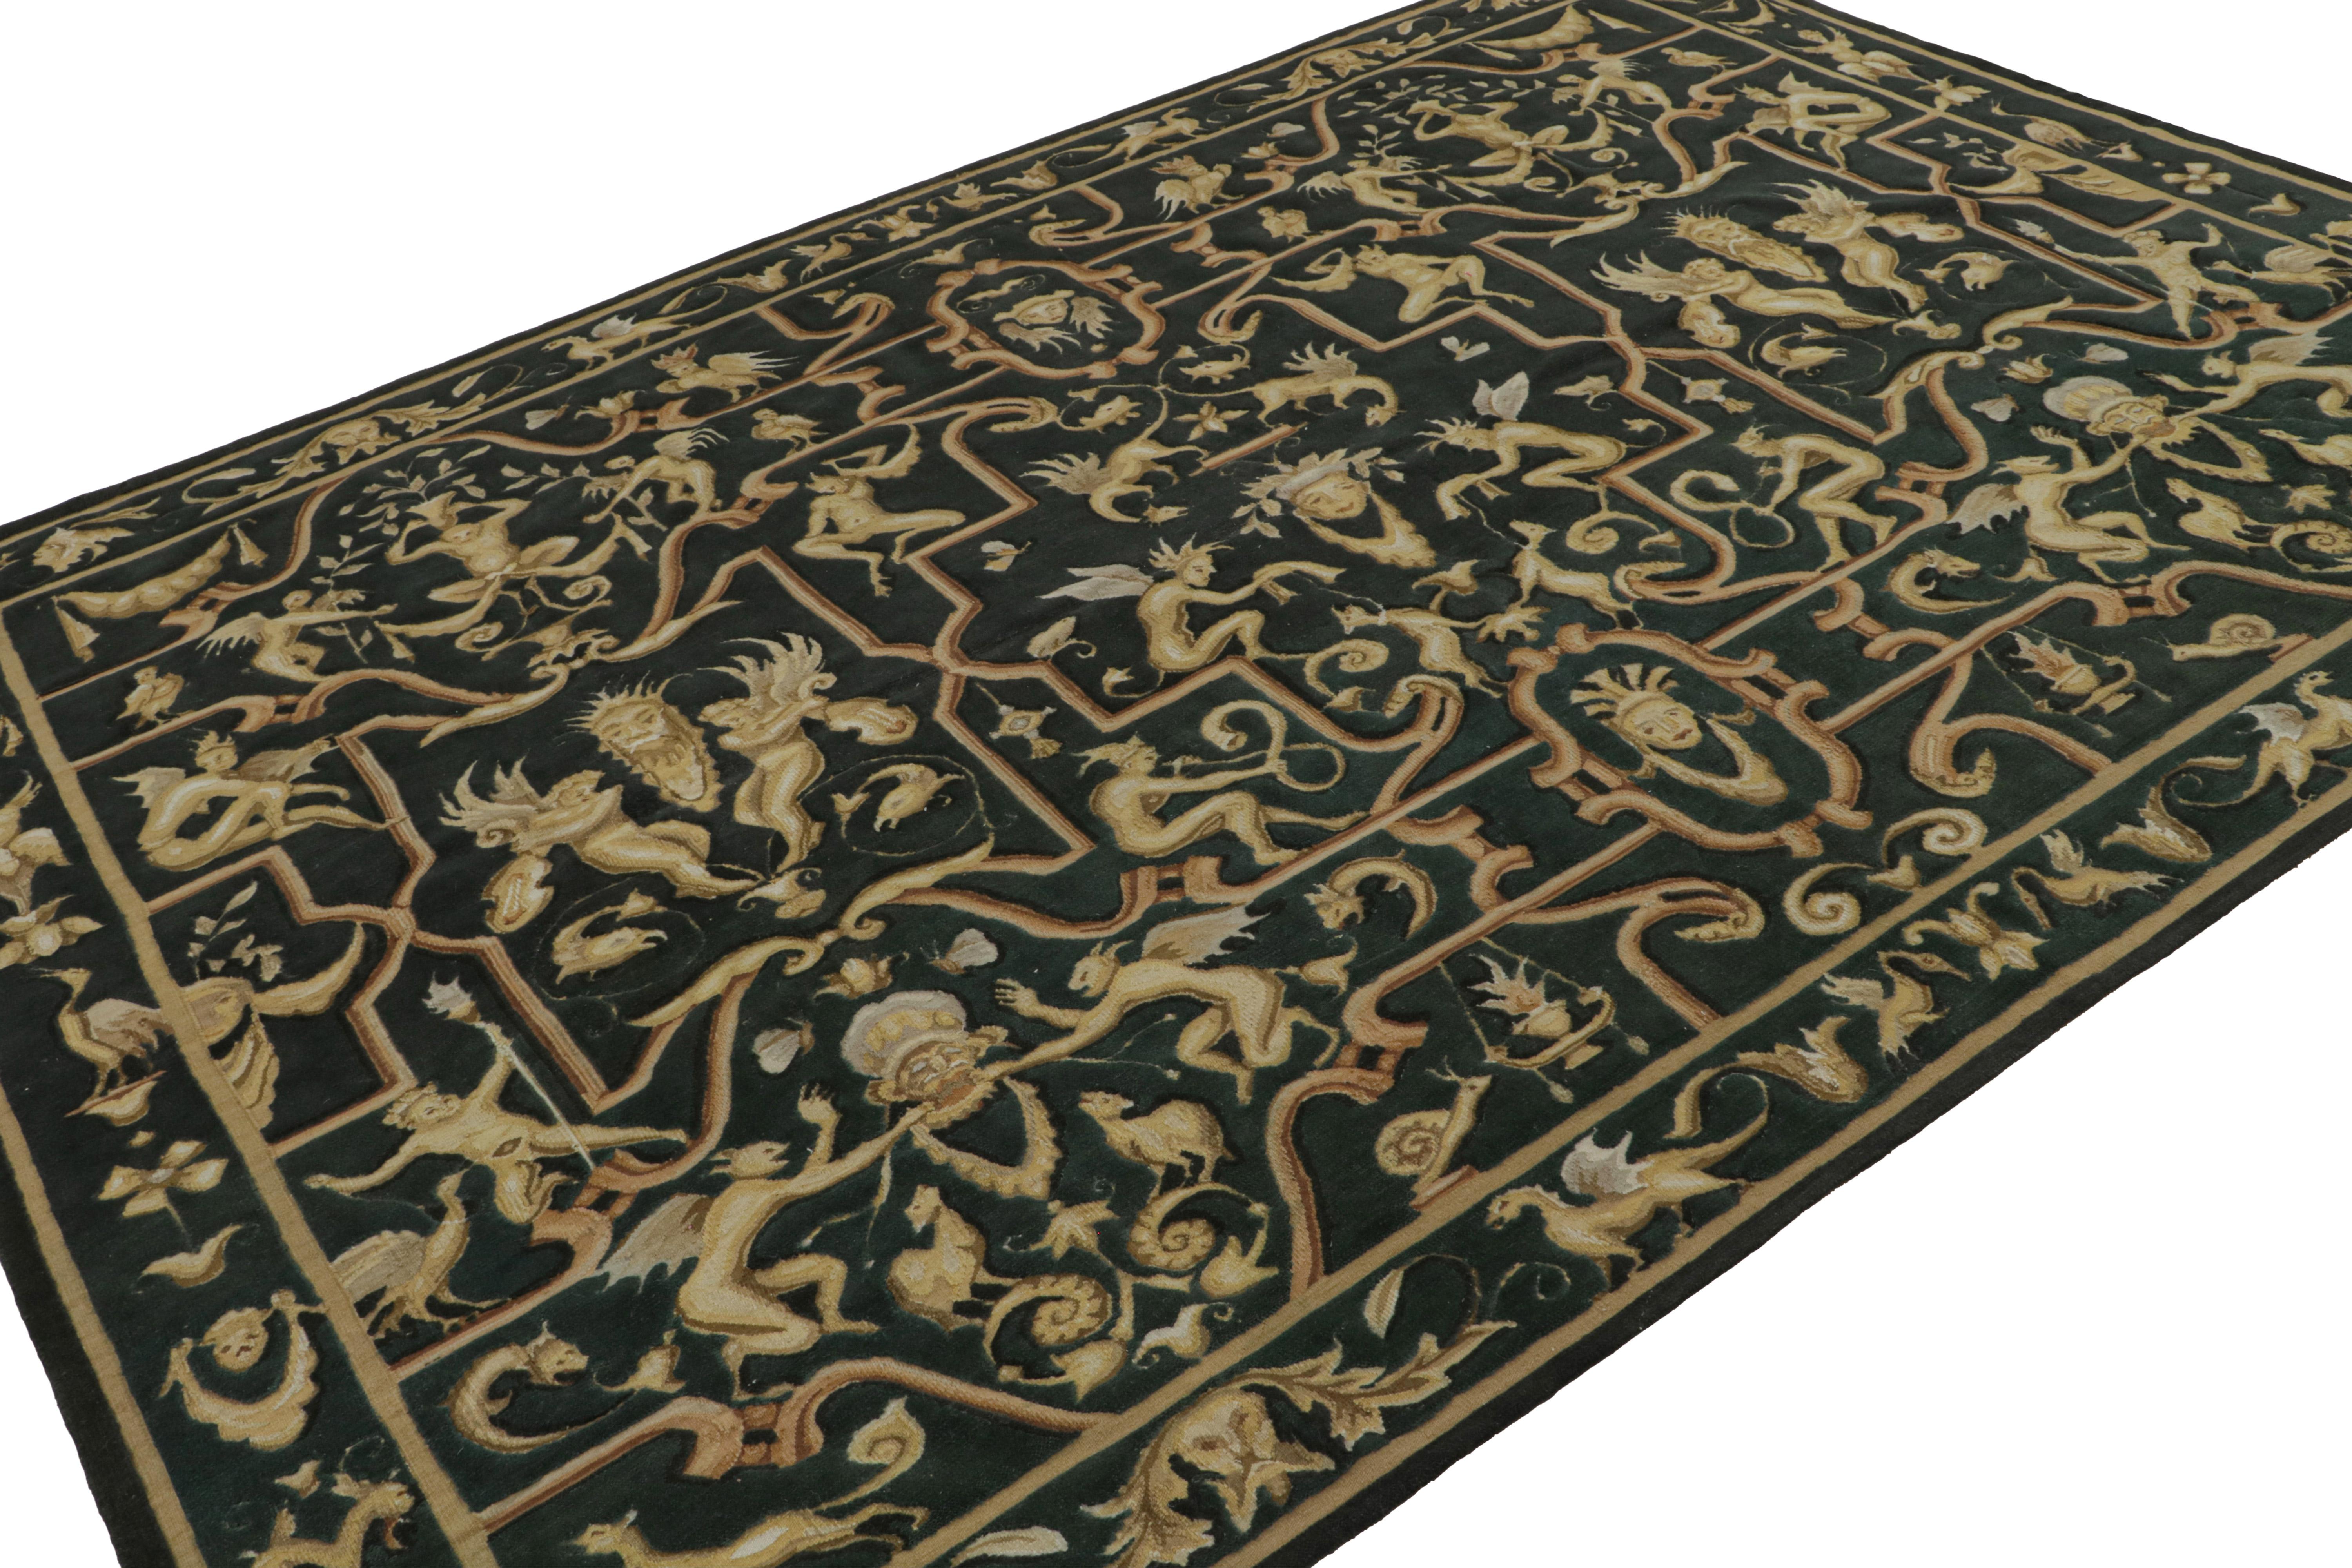 Hand-knotted in wool, this 8x11 European flatweave rug in dark teal showcases a wide range of human, animal, and mythological figures in gold. This regal design has been inspired by a Tudor rug and tapestry design. 

On the design: 

Featuring